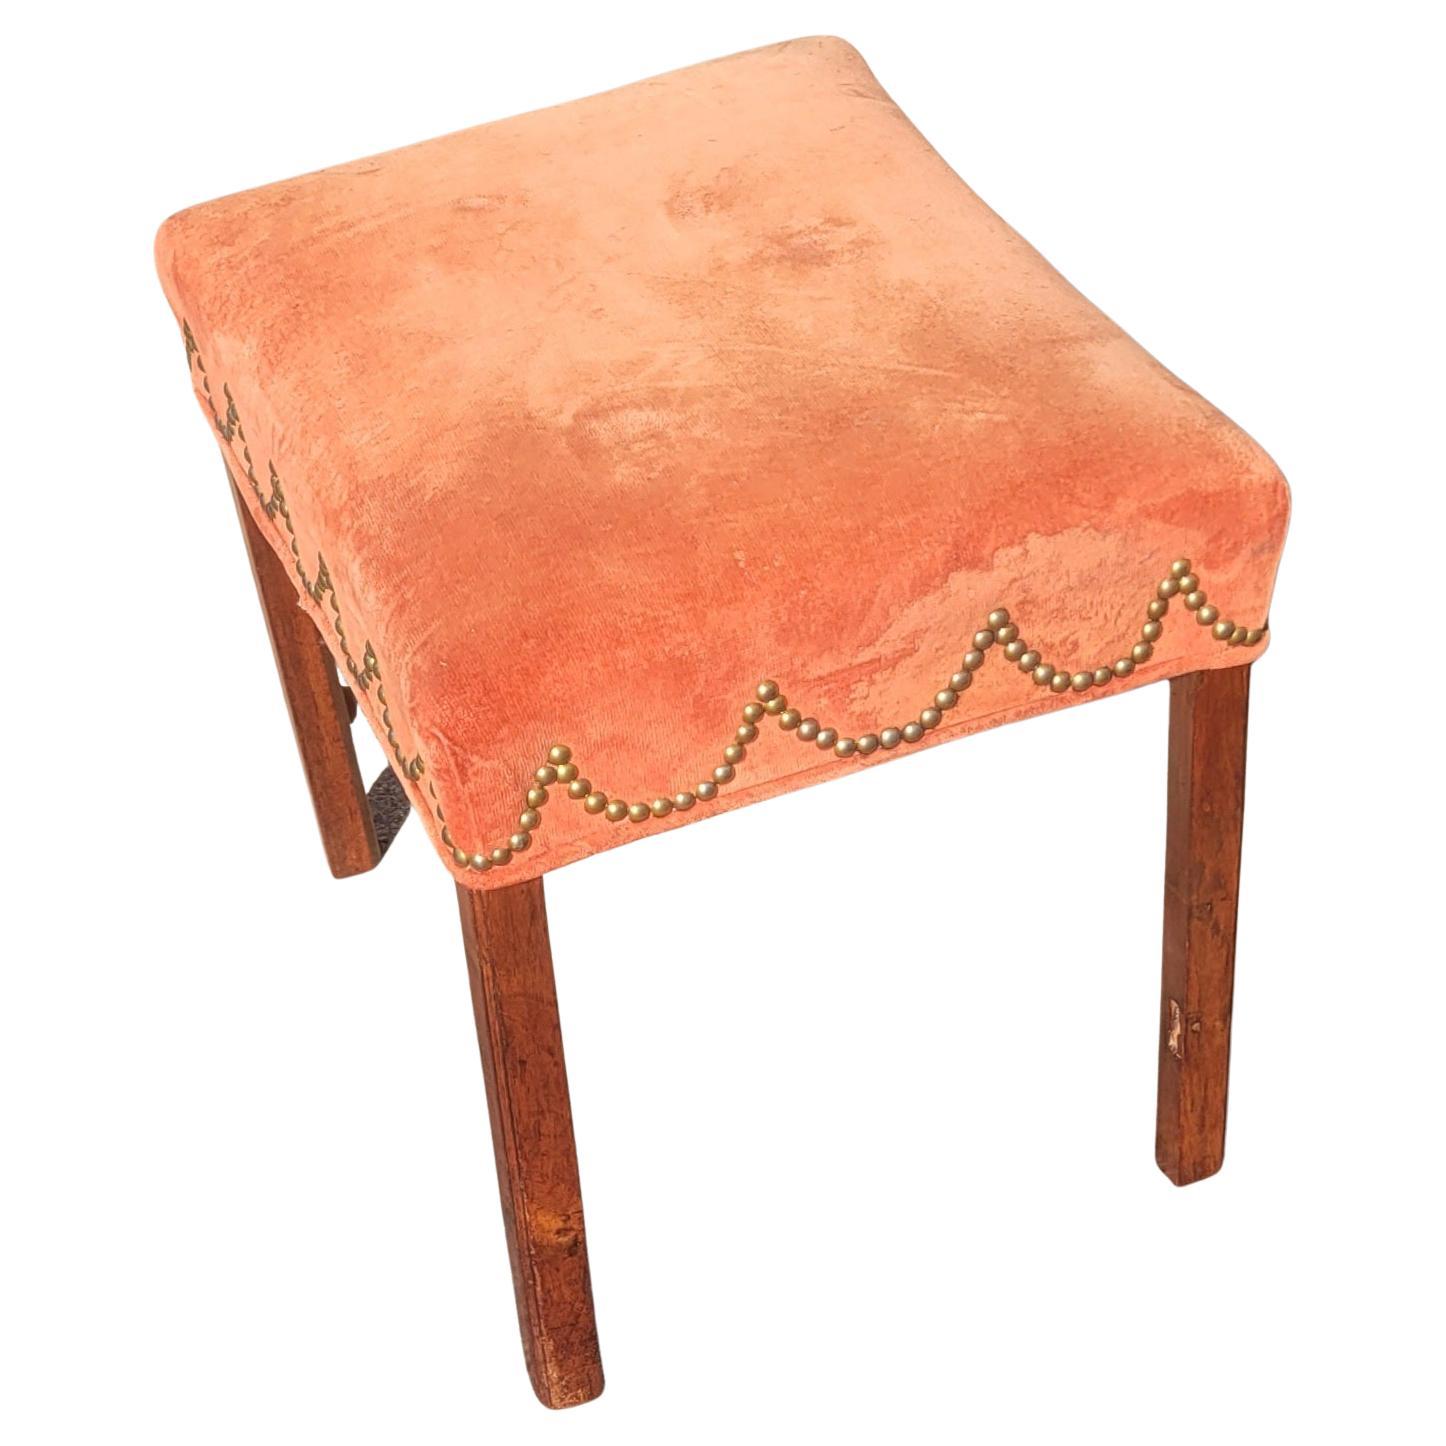 Early 20th C. Mahogany and Velvet Upholstered Stool with Nailhead Trims In Good Condition For Sale In Germantown, MD